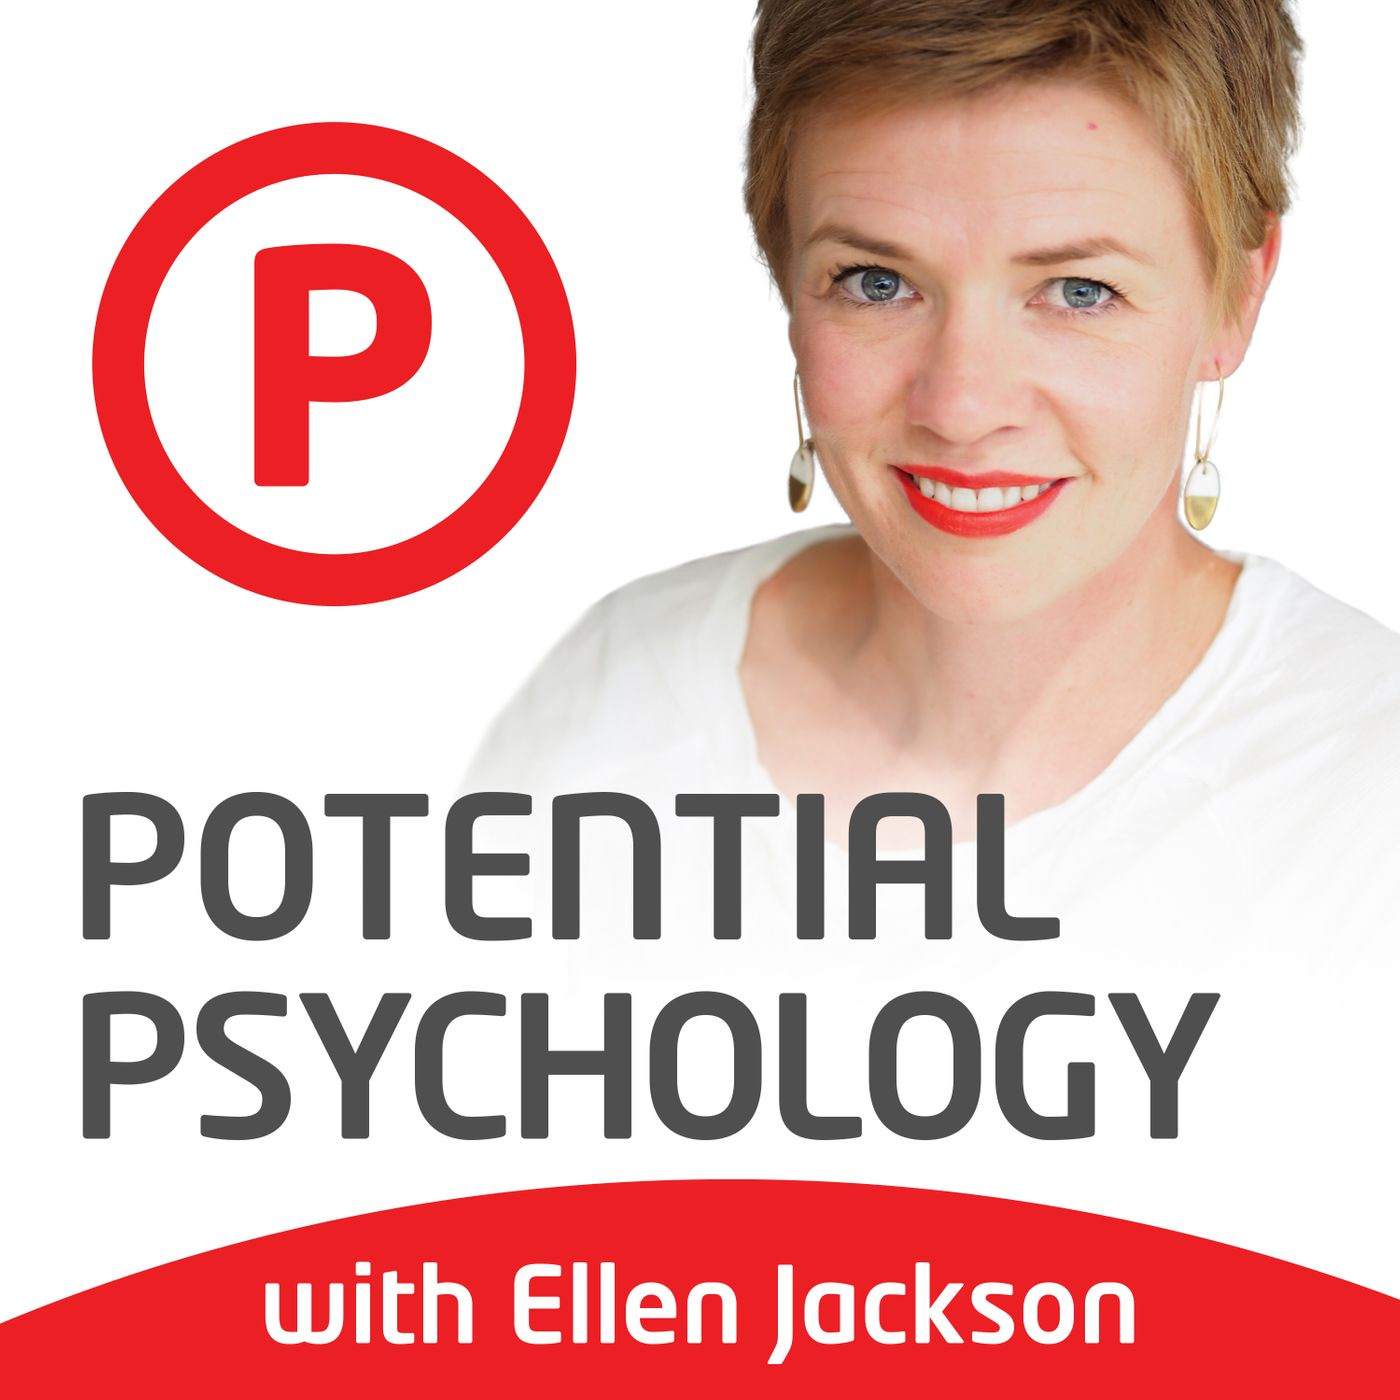 Prioritising Positivity with Dr Suzy Green